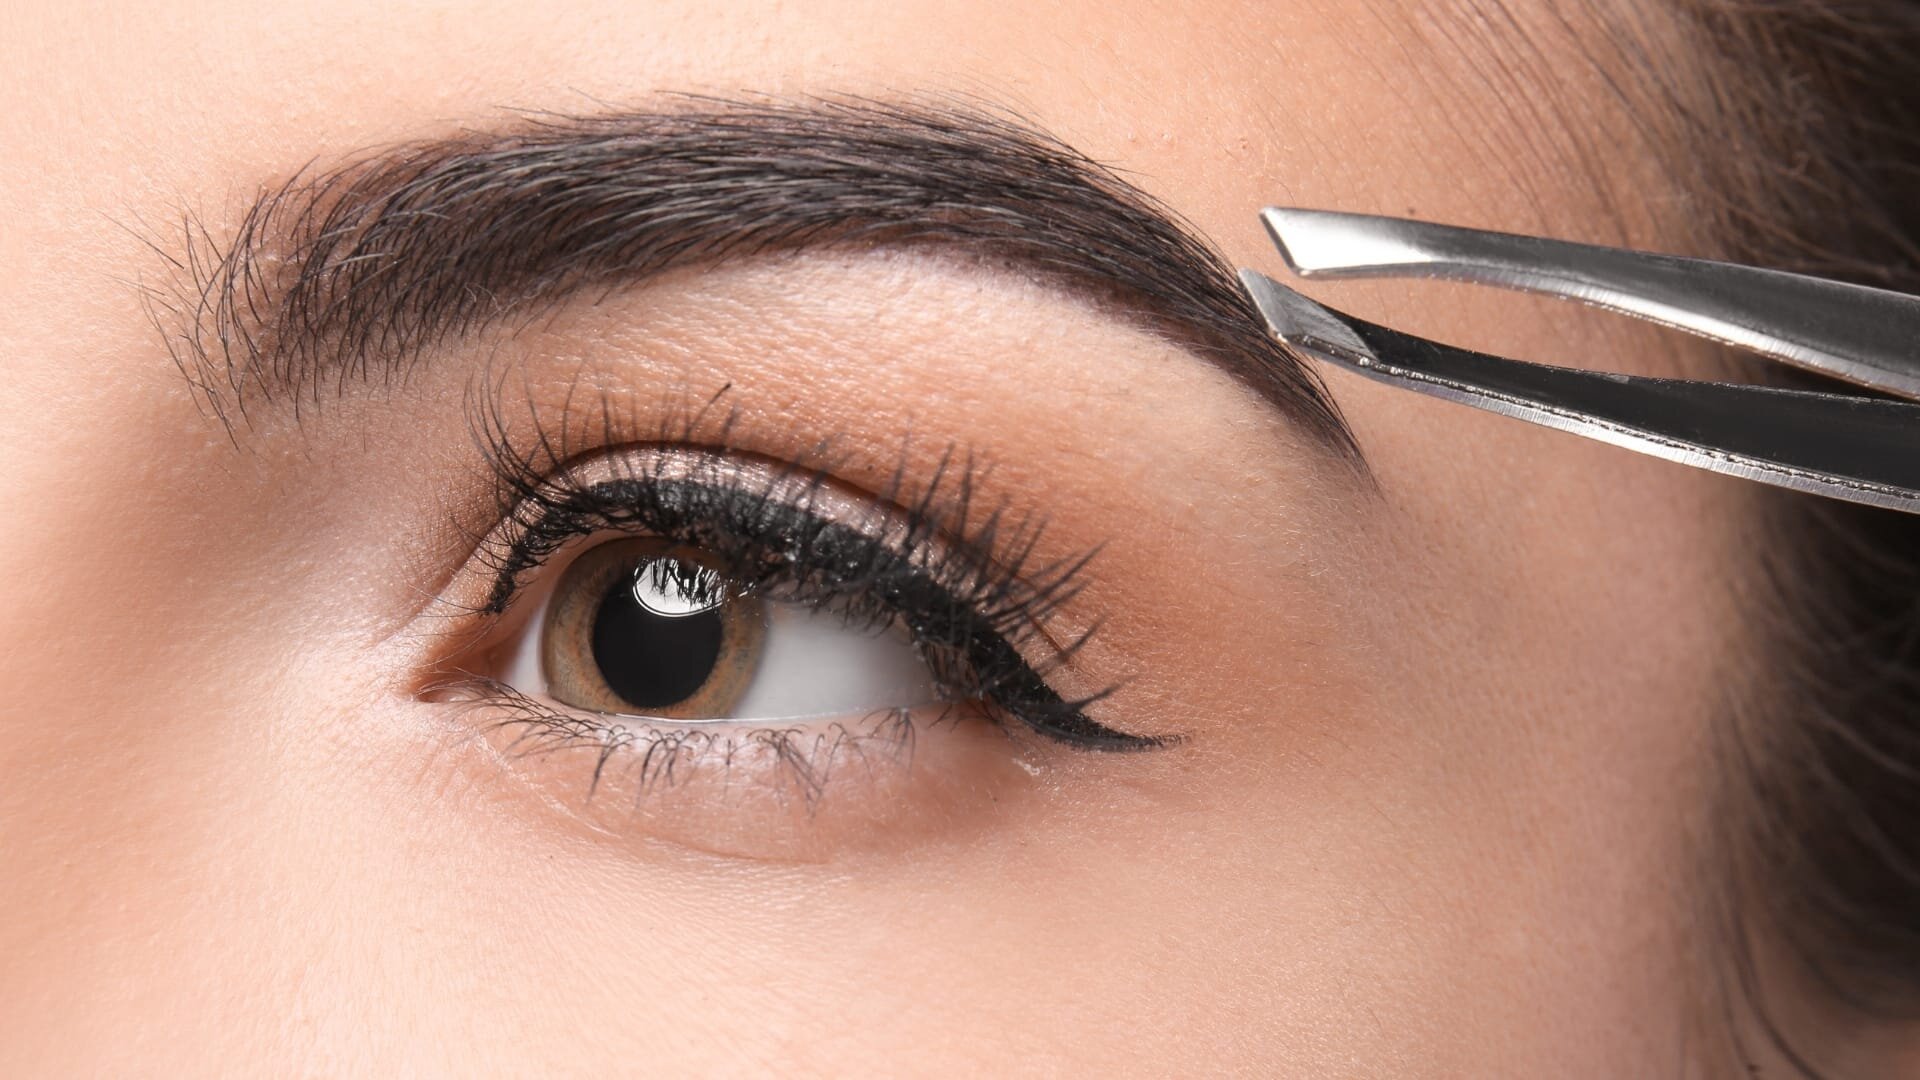 15-captivating-facts-about-eyebrow